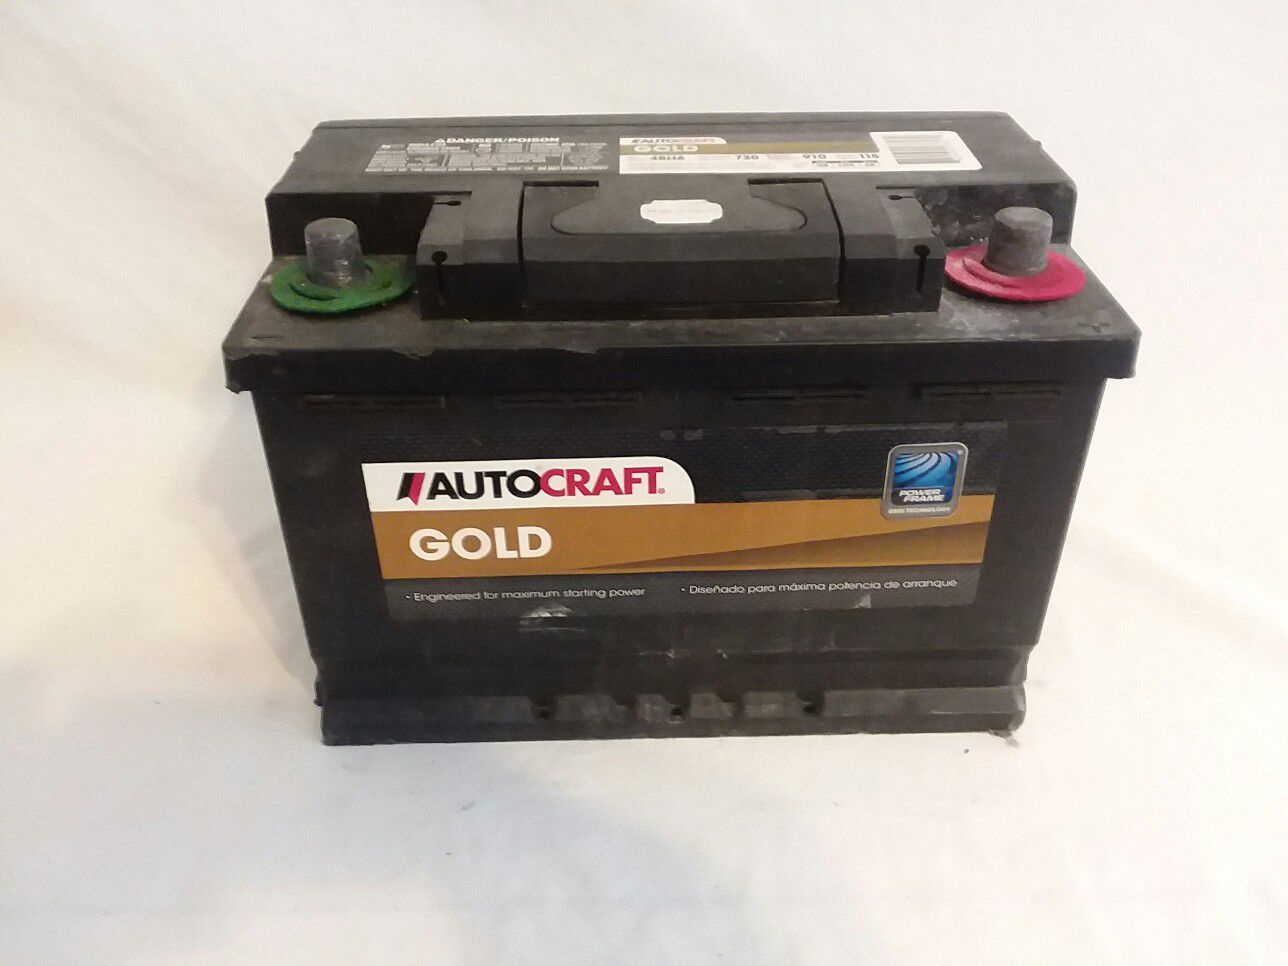 AutoCraft Gold 48H6 730 CCA Car Battery for Chevrolet and GMC vehicles